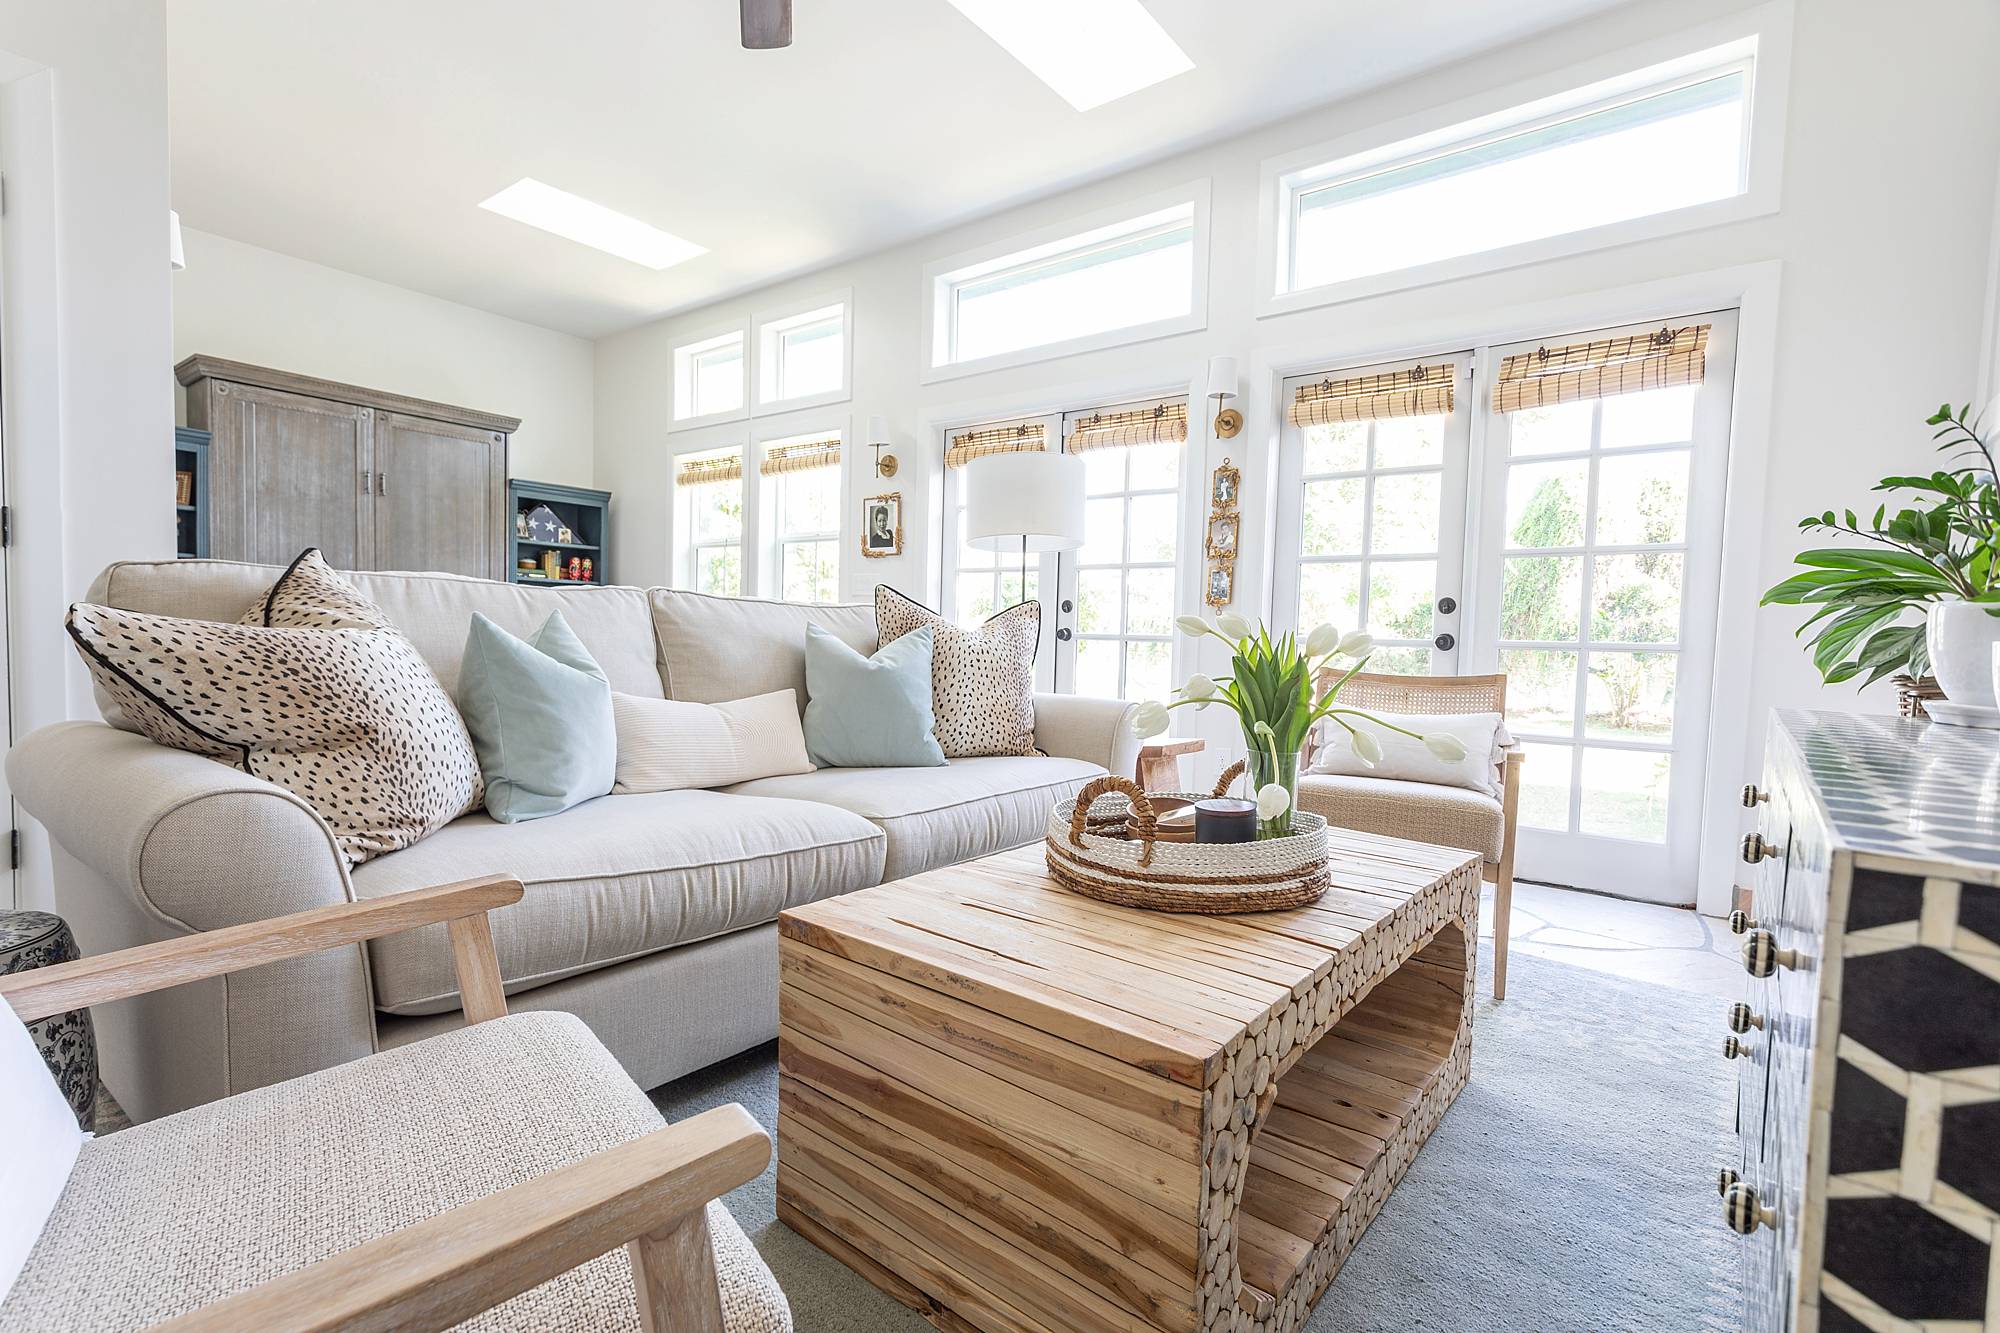 Skylights or Sun tunnels: Natural light in your home - Diana Elizabeth